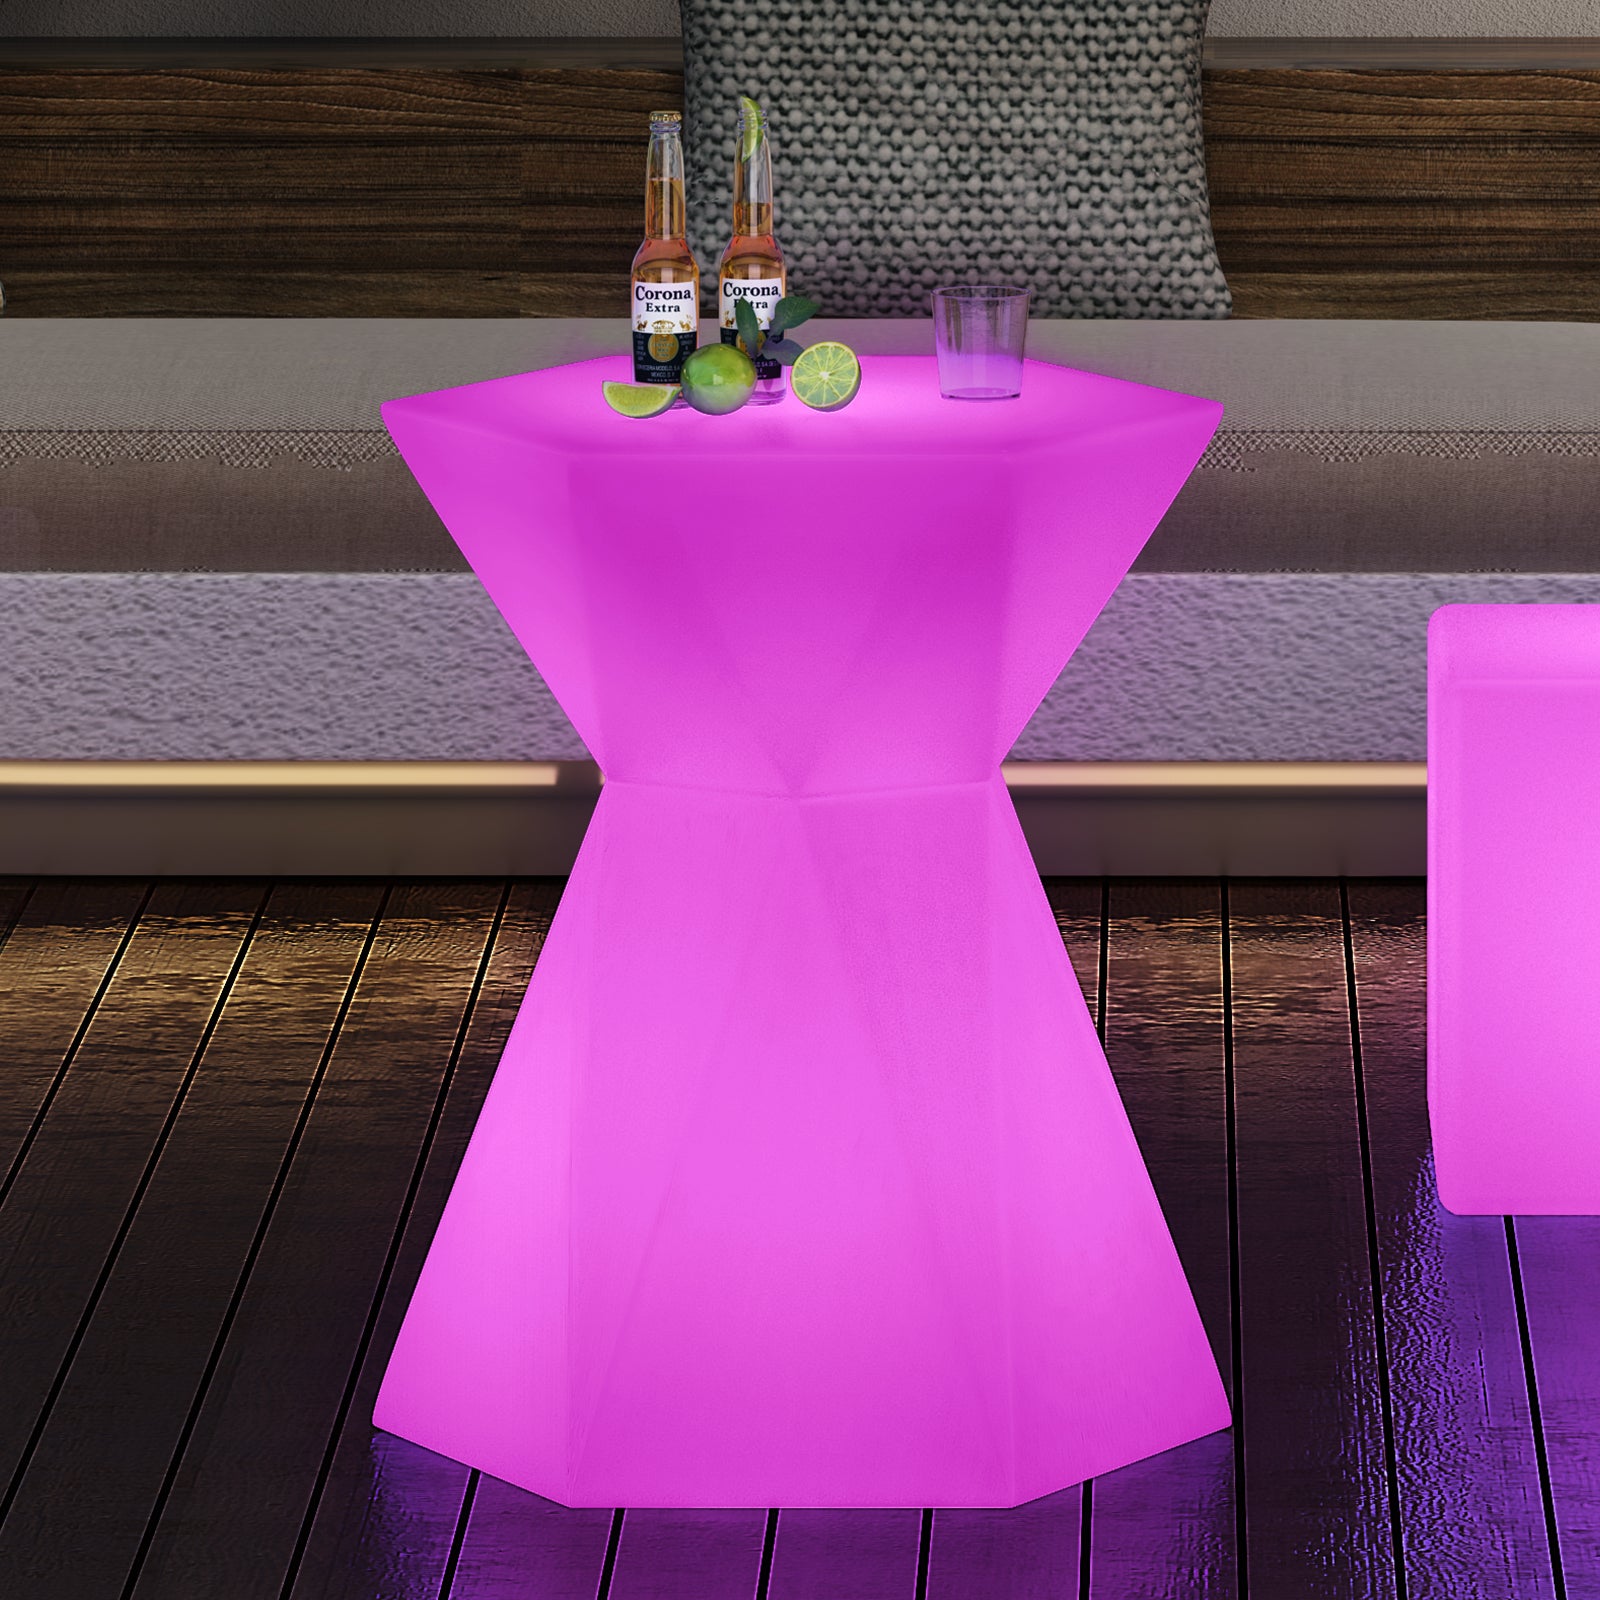 Mjkone Changing Colors LED Cocktail Table with Slim Waist, 20" Light Up Wine Table Cordless LED Cocktail Table, Rechargeable Light Up Pub Table for Party, Home Patio Pool Ambiance LED Furniture